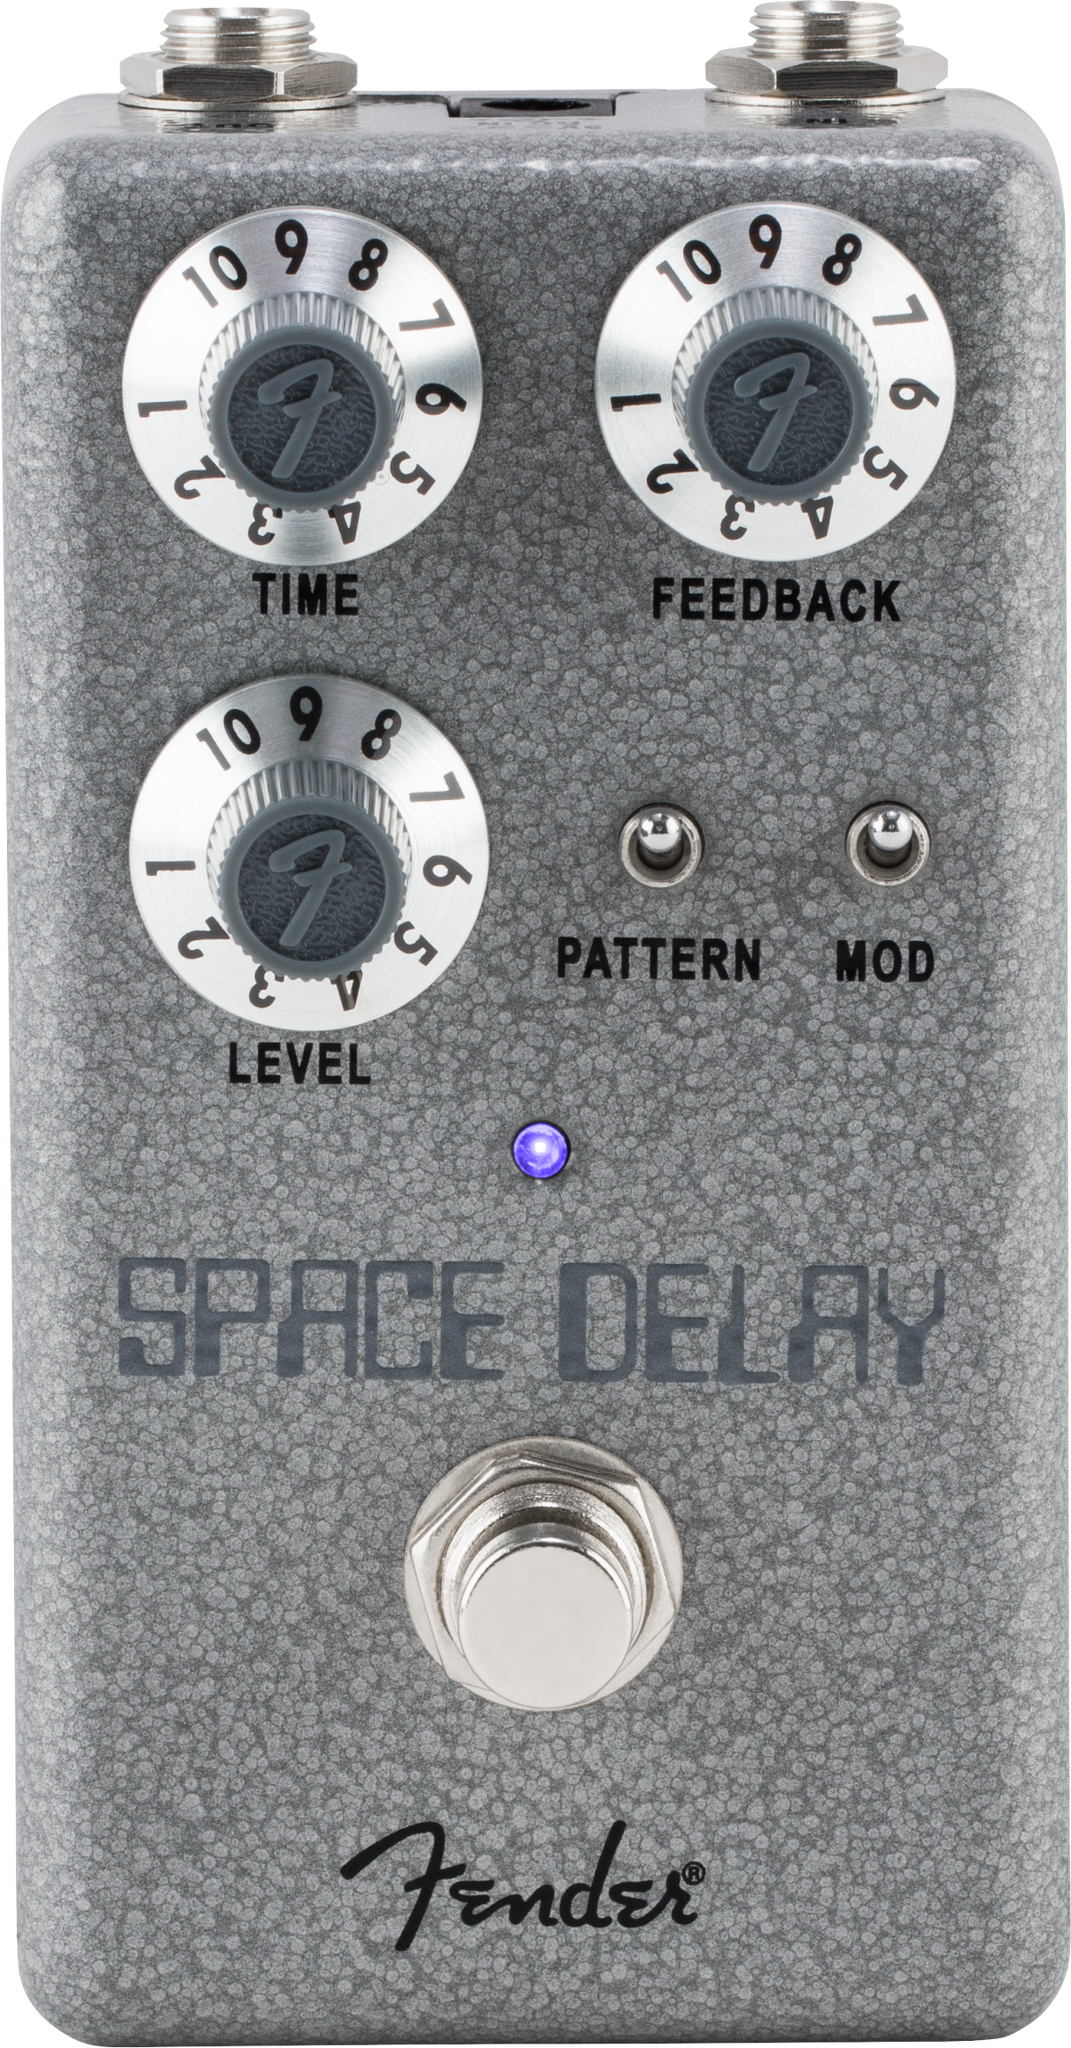 Fender Hammertone™ Space Delay - FREE delivery